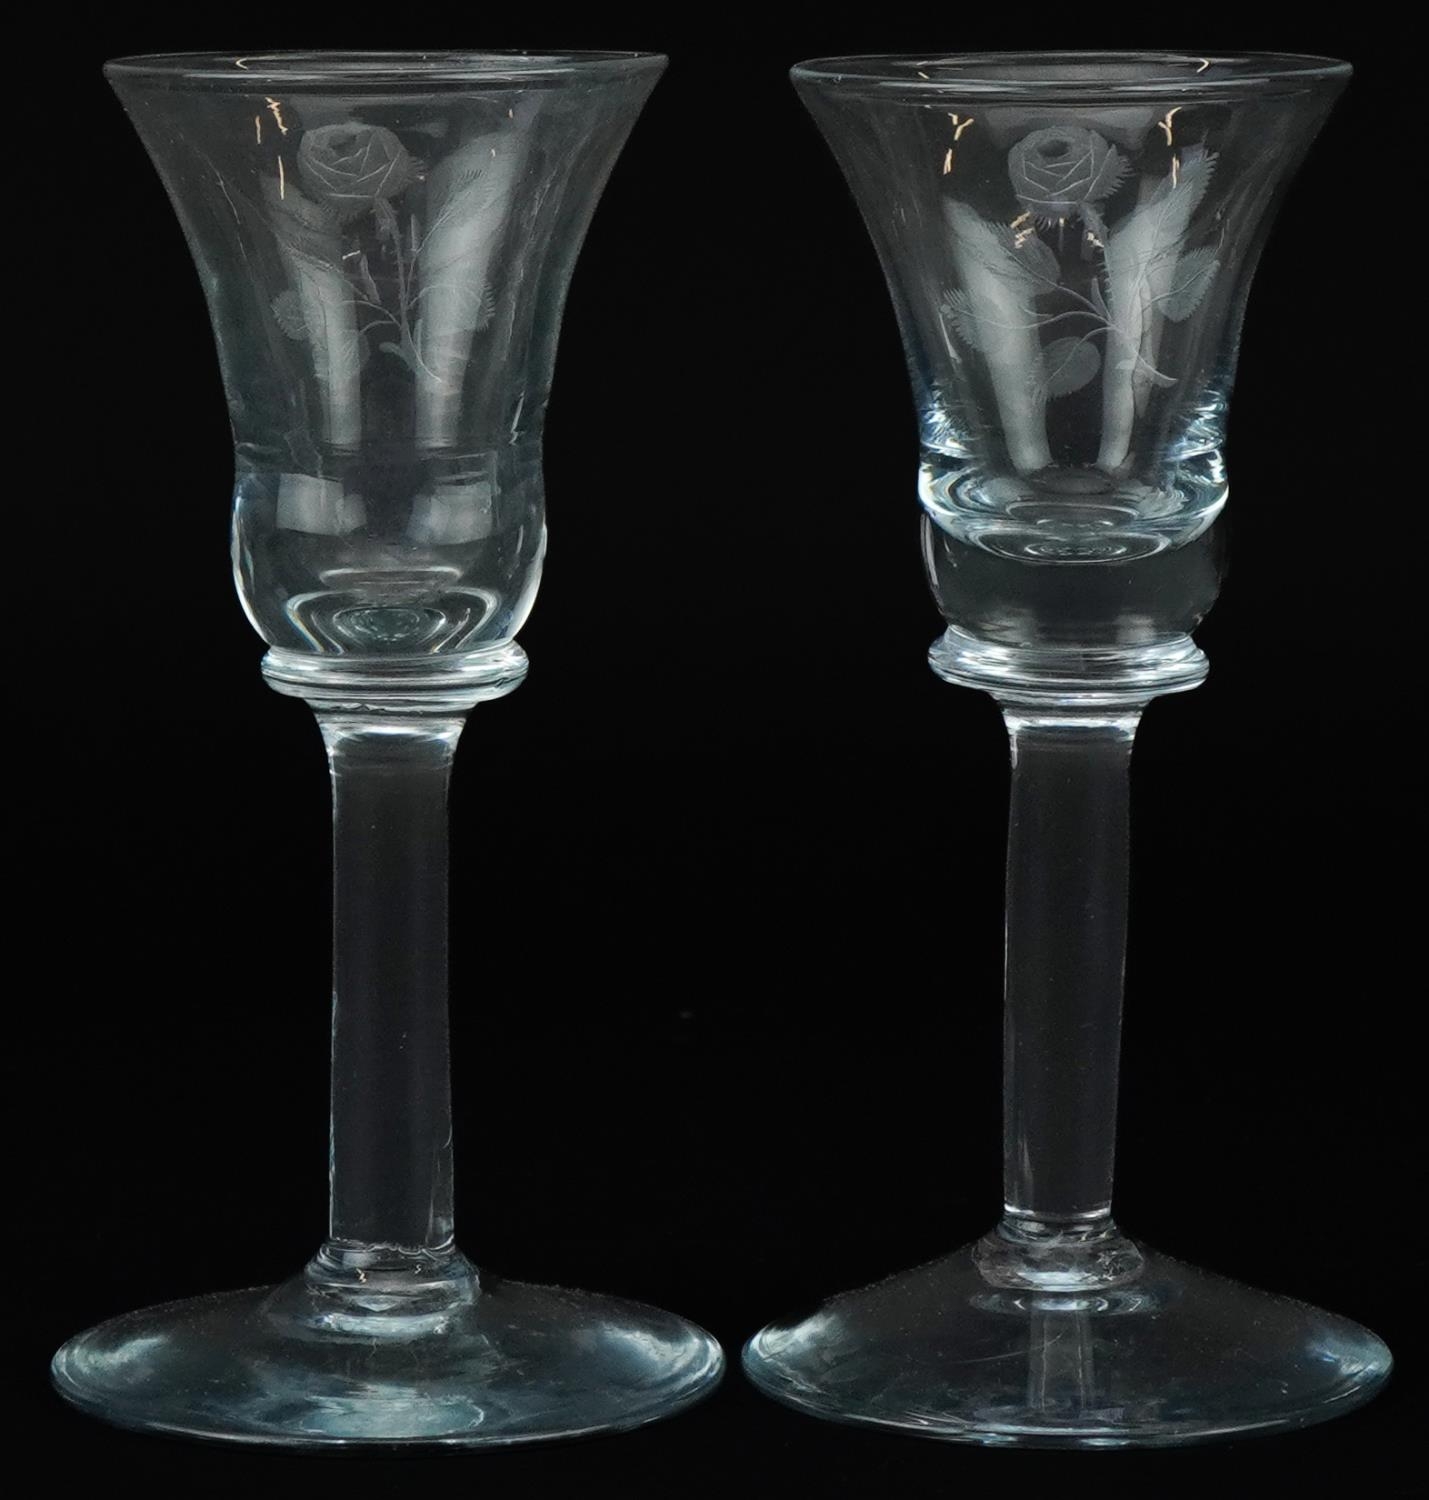 Near pair of wine glasses etched with Jacobite roses, each 15cm high - Image 2 of 4